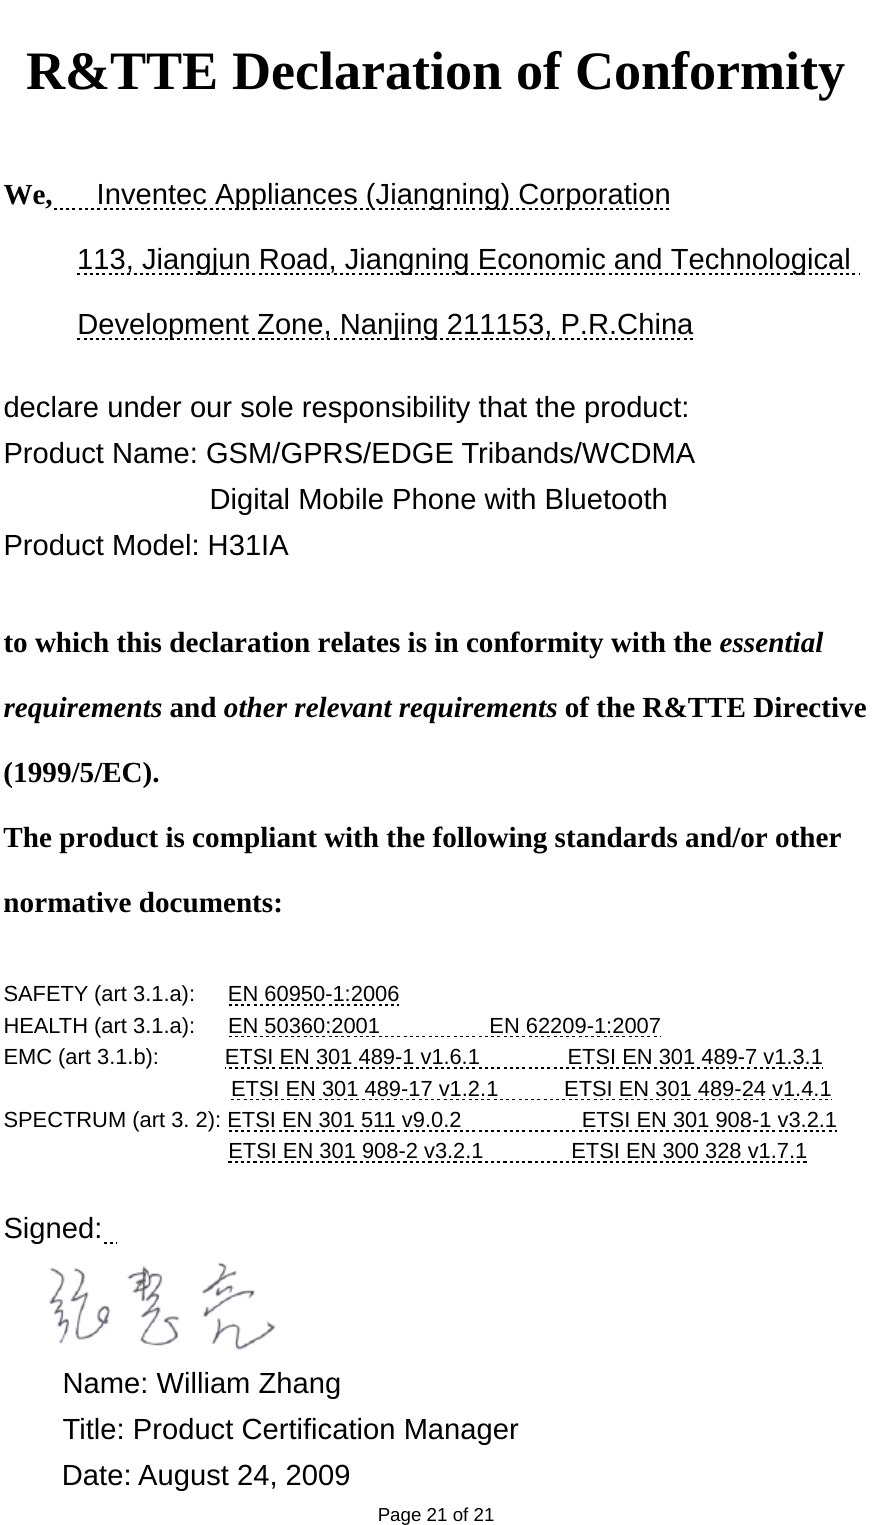   Page 21 of 21 R&amp;TTE Declaration of Conformity    We,   Inventec Appliances (Jiangning) Corporation 113, Jiangjun Road, Jiangning Economic and Technological Development Zone, Nanjing 211153, P.R.China  declare under our sole responsibility that the product: Product Name: GSM/GPRS/EDGE Tribands/WCDMA   Digital Mobile Phone with Bluetooth Product Model: H31IA  to which this declaration relates is in conformity with the essential requirements and other relevant requirements of the R&amp;TTE Directive (1999/5/EC). The product is compliant with the following standards and/or other normative documents:  SAFETY (art 3.1.a):      EN 60950-1:2006 HEALTH (art 3.1.a):   EN 50360:2001          EN 62209-1:2007 EMC (art 3.1.b):            ETSI EN 301 489-1 v1.6.1        ETSI EN 301 489-7 v1.3.1 ETSI EN 301 489-17 v1.2.1            ETSI EN 301 489-24 v1.4.1 SPECTRUM (art 3. 2): ETSI EN 301 511 v9.0.2           ETSI EN 301 908-1 v3.2.1 ETSI EN 301 908-2 v3.2.1                ETSI EN 300 328 v1.7.1  Signed:      Name: William Zhang   Title: Product Certification Manager Date: August 24, 2009 